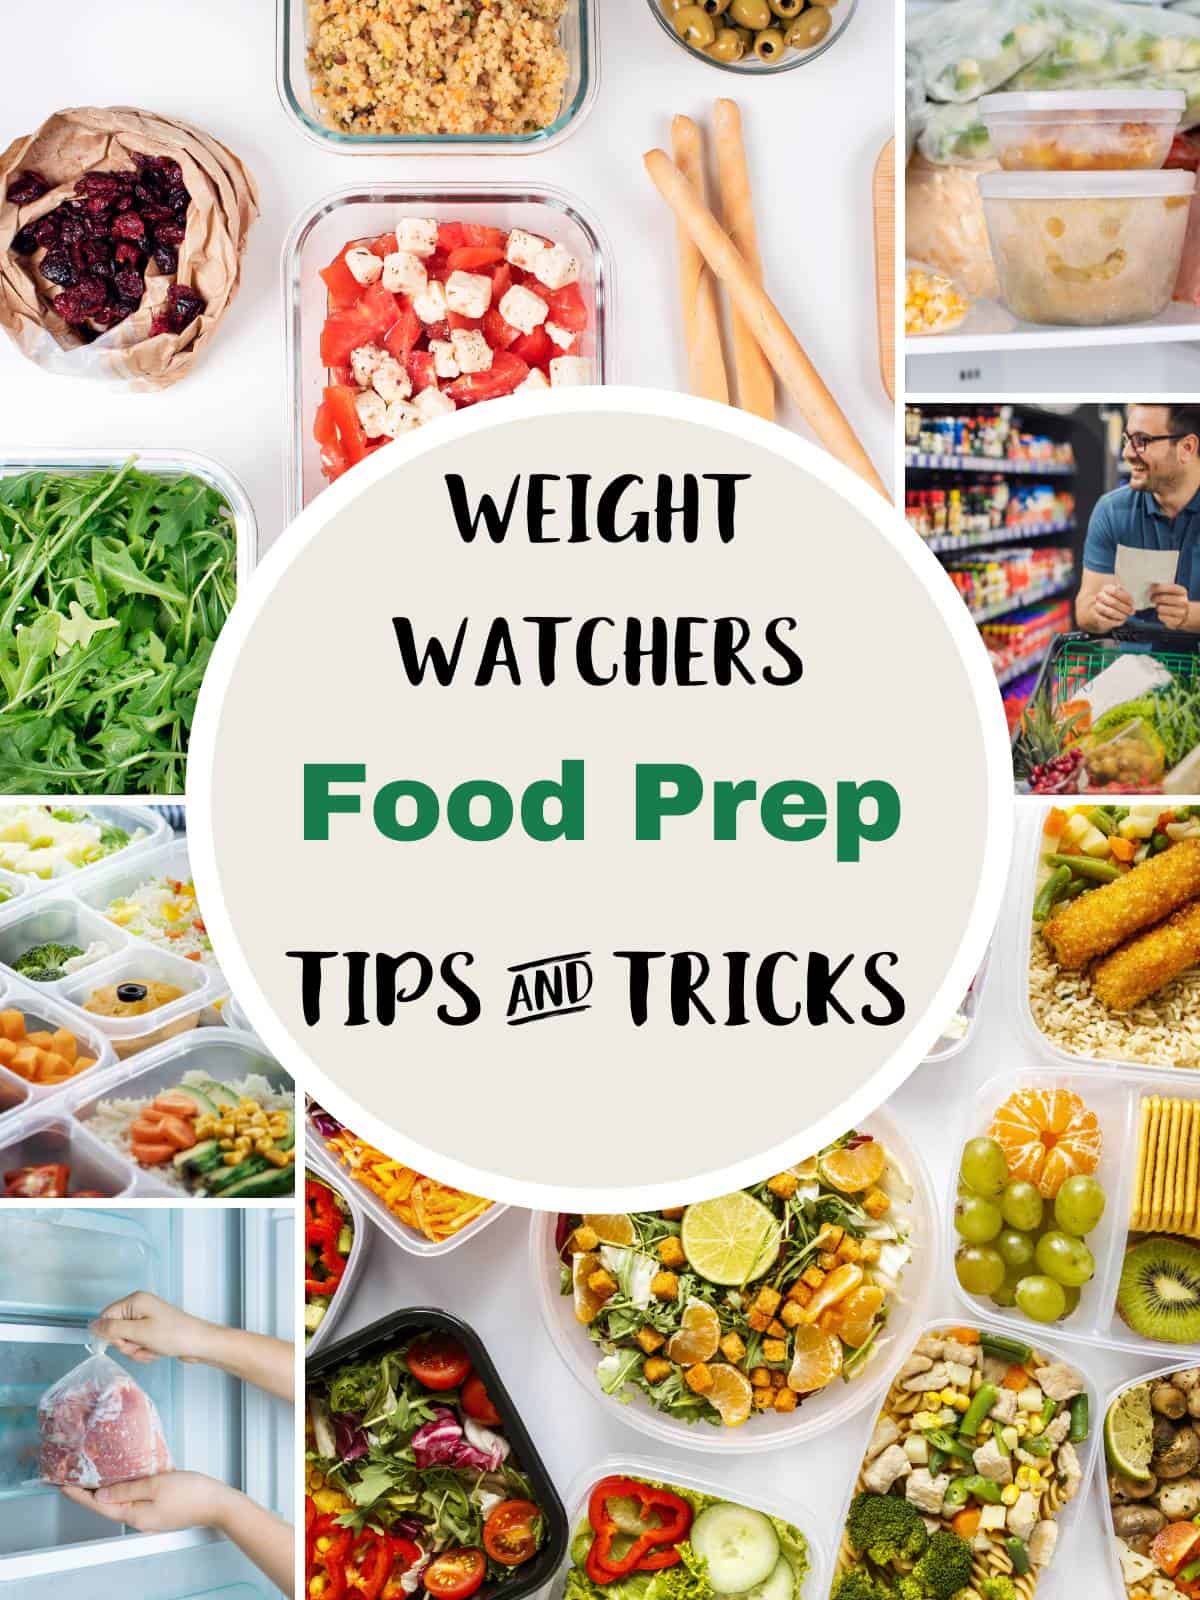 A collage of photographs of food preparation with text overlay stating Weight Watchers Food Prep Tips and Tricks.